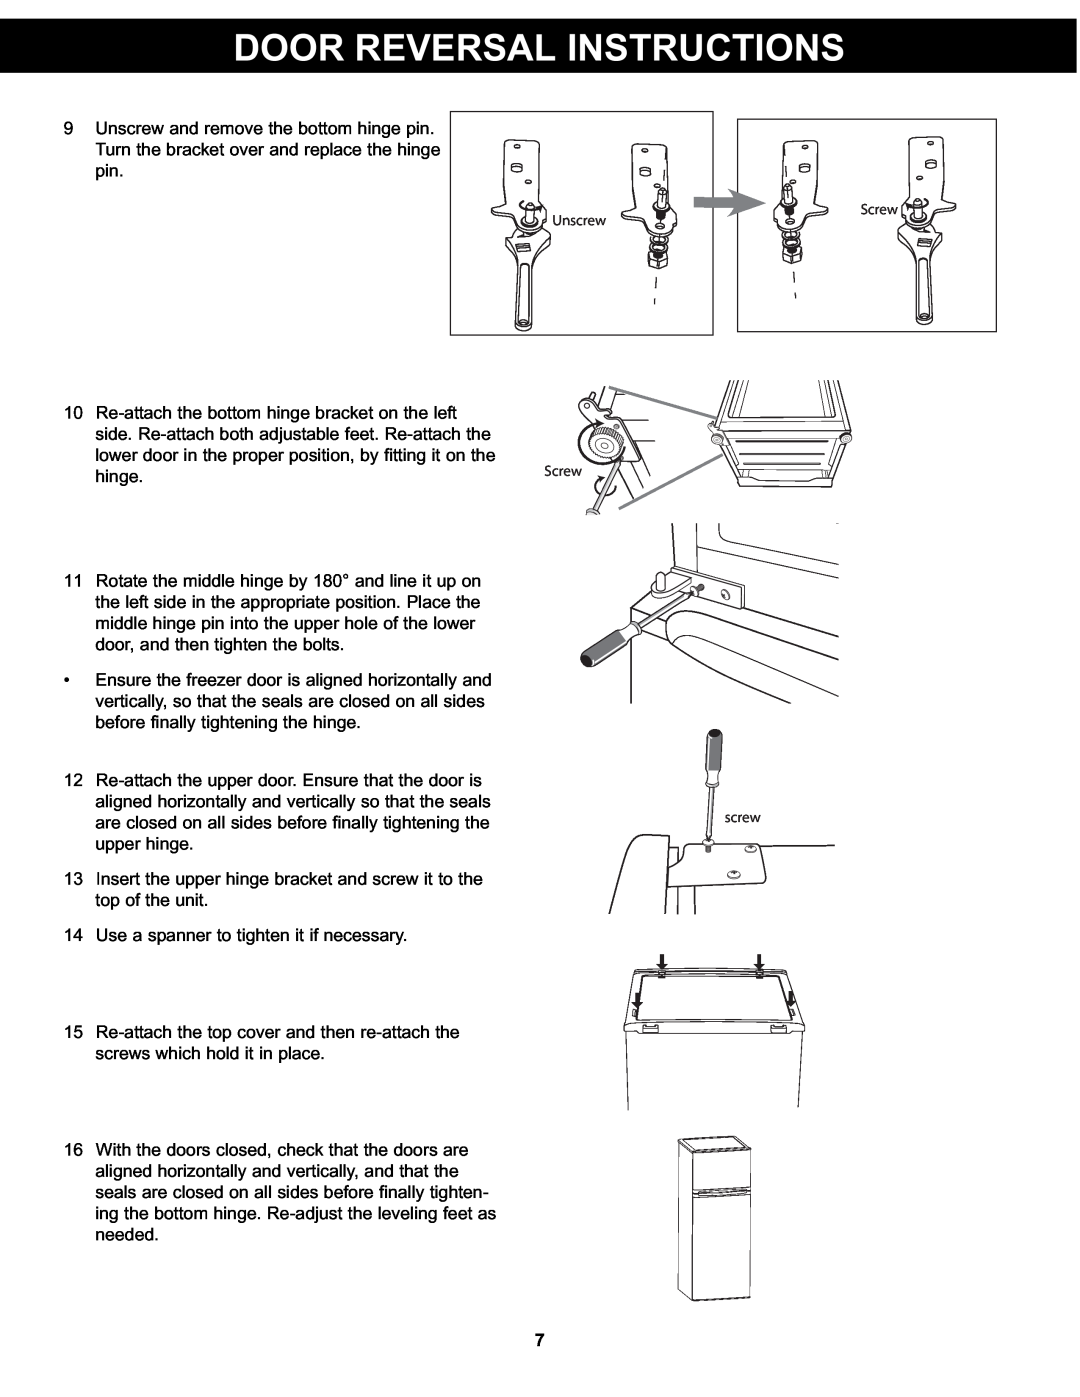 Danby DPF074B1WDB manual Door Reversal Instructions, Unscrew and remove the bottom hinge pin 